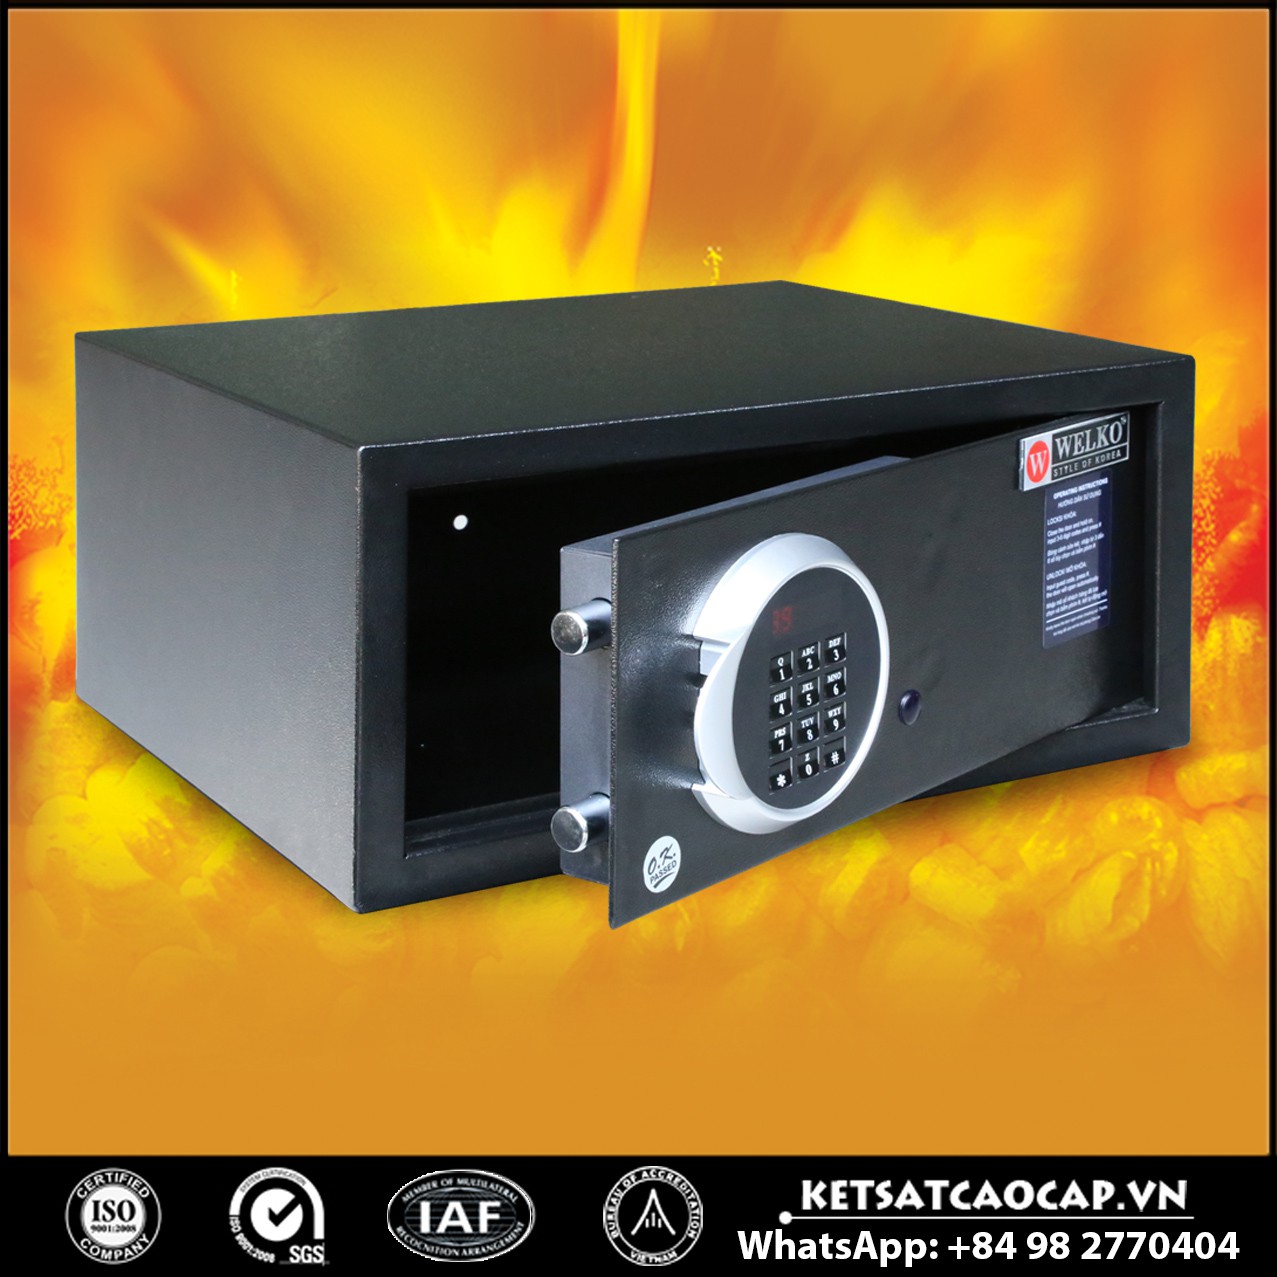 Best Sellers In Hotel Safes Suppliers and Exporters Brands